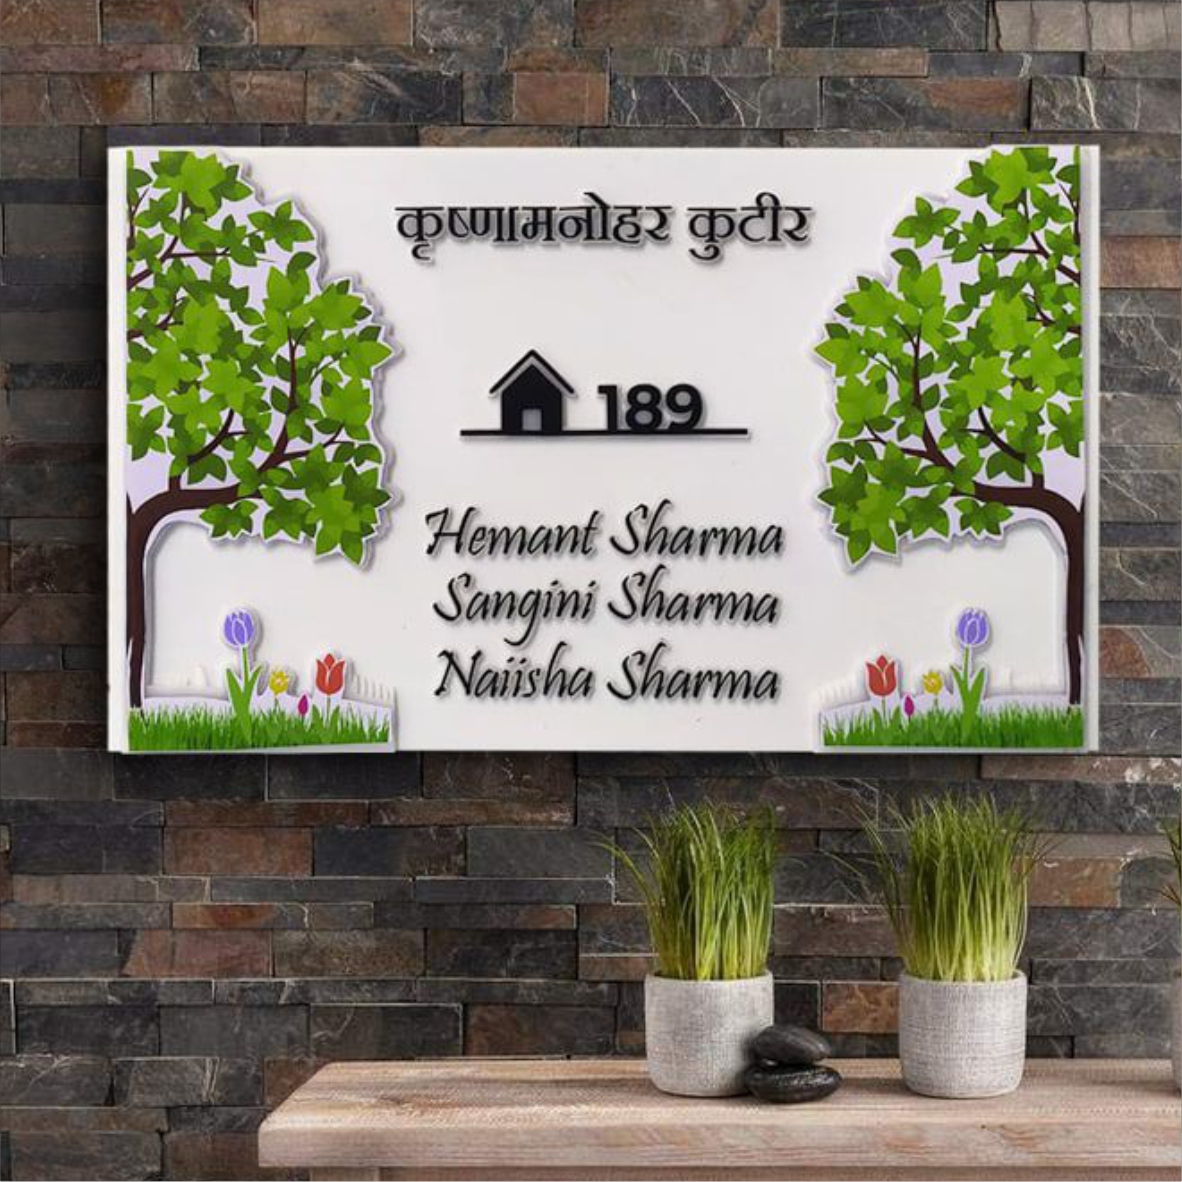 https://zocivoci.com/wp-content/uploads/2022/05/name-plate-with-tree.jpg